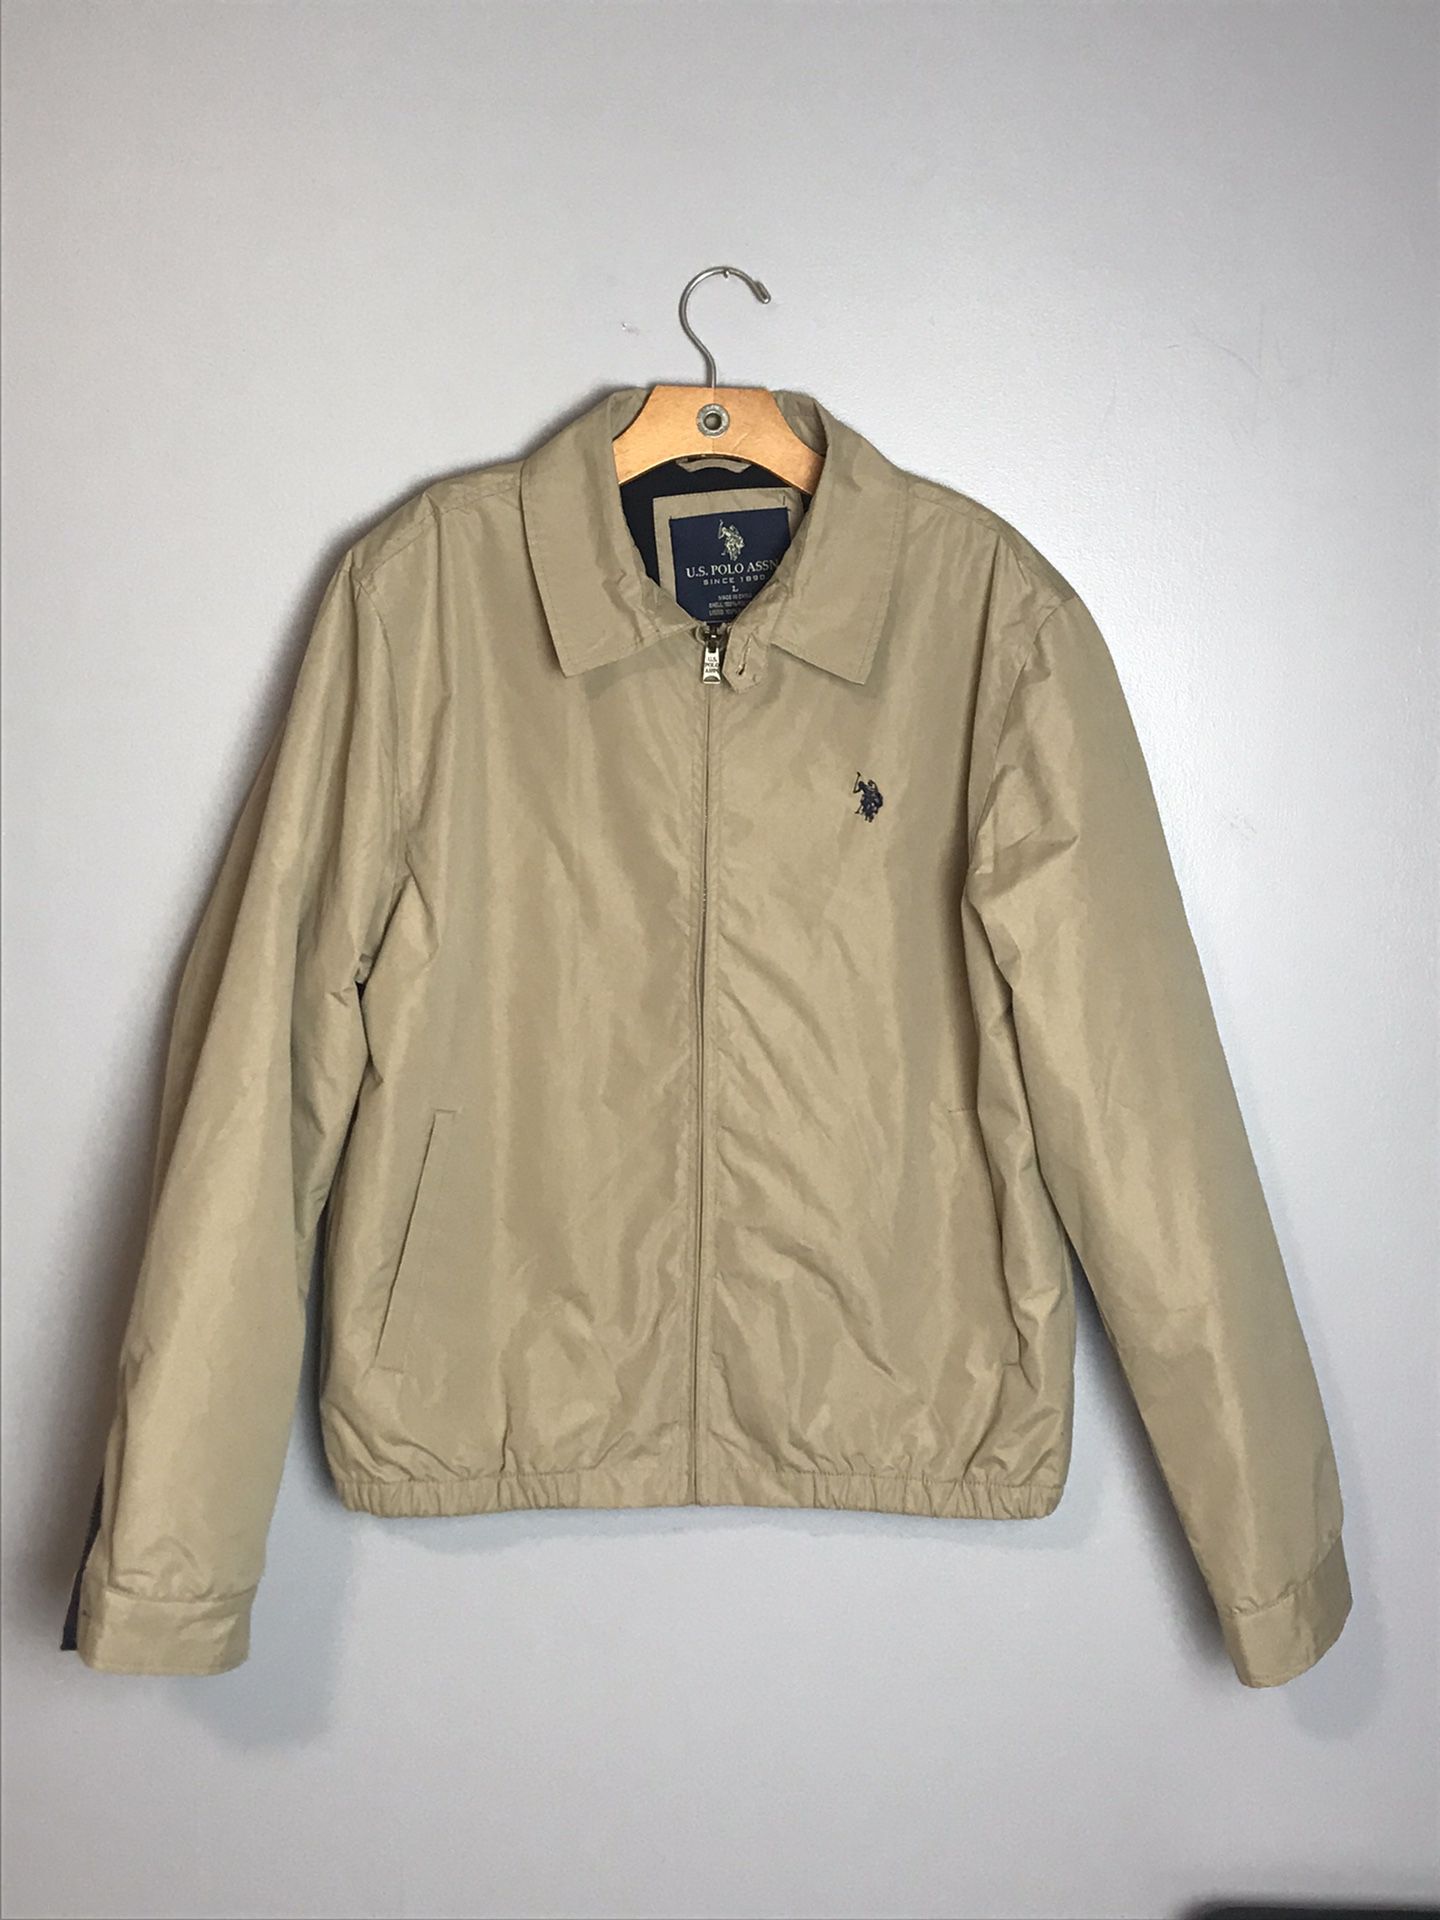 Men’s Jacket U.S. POLO ASSN. Tan Large Gently used